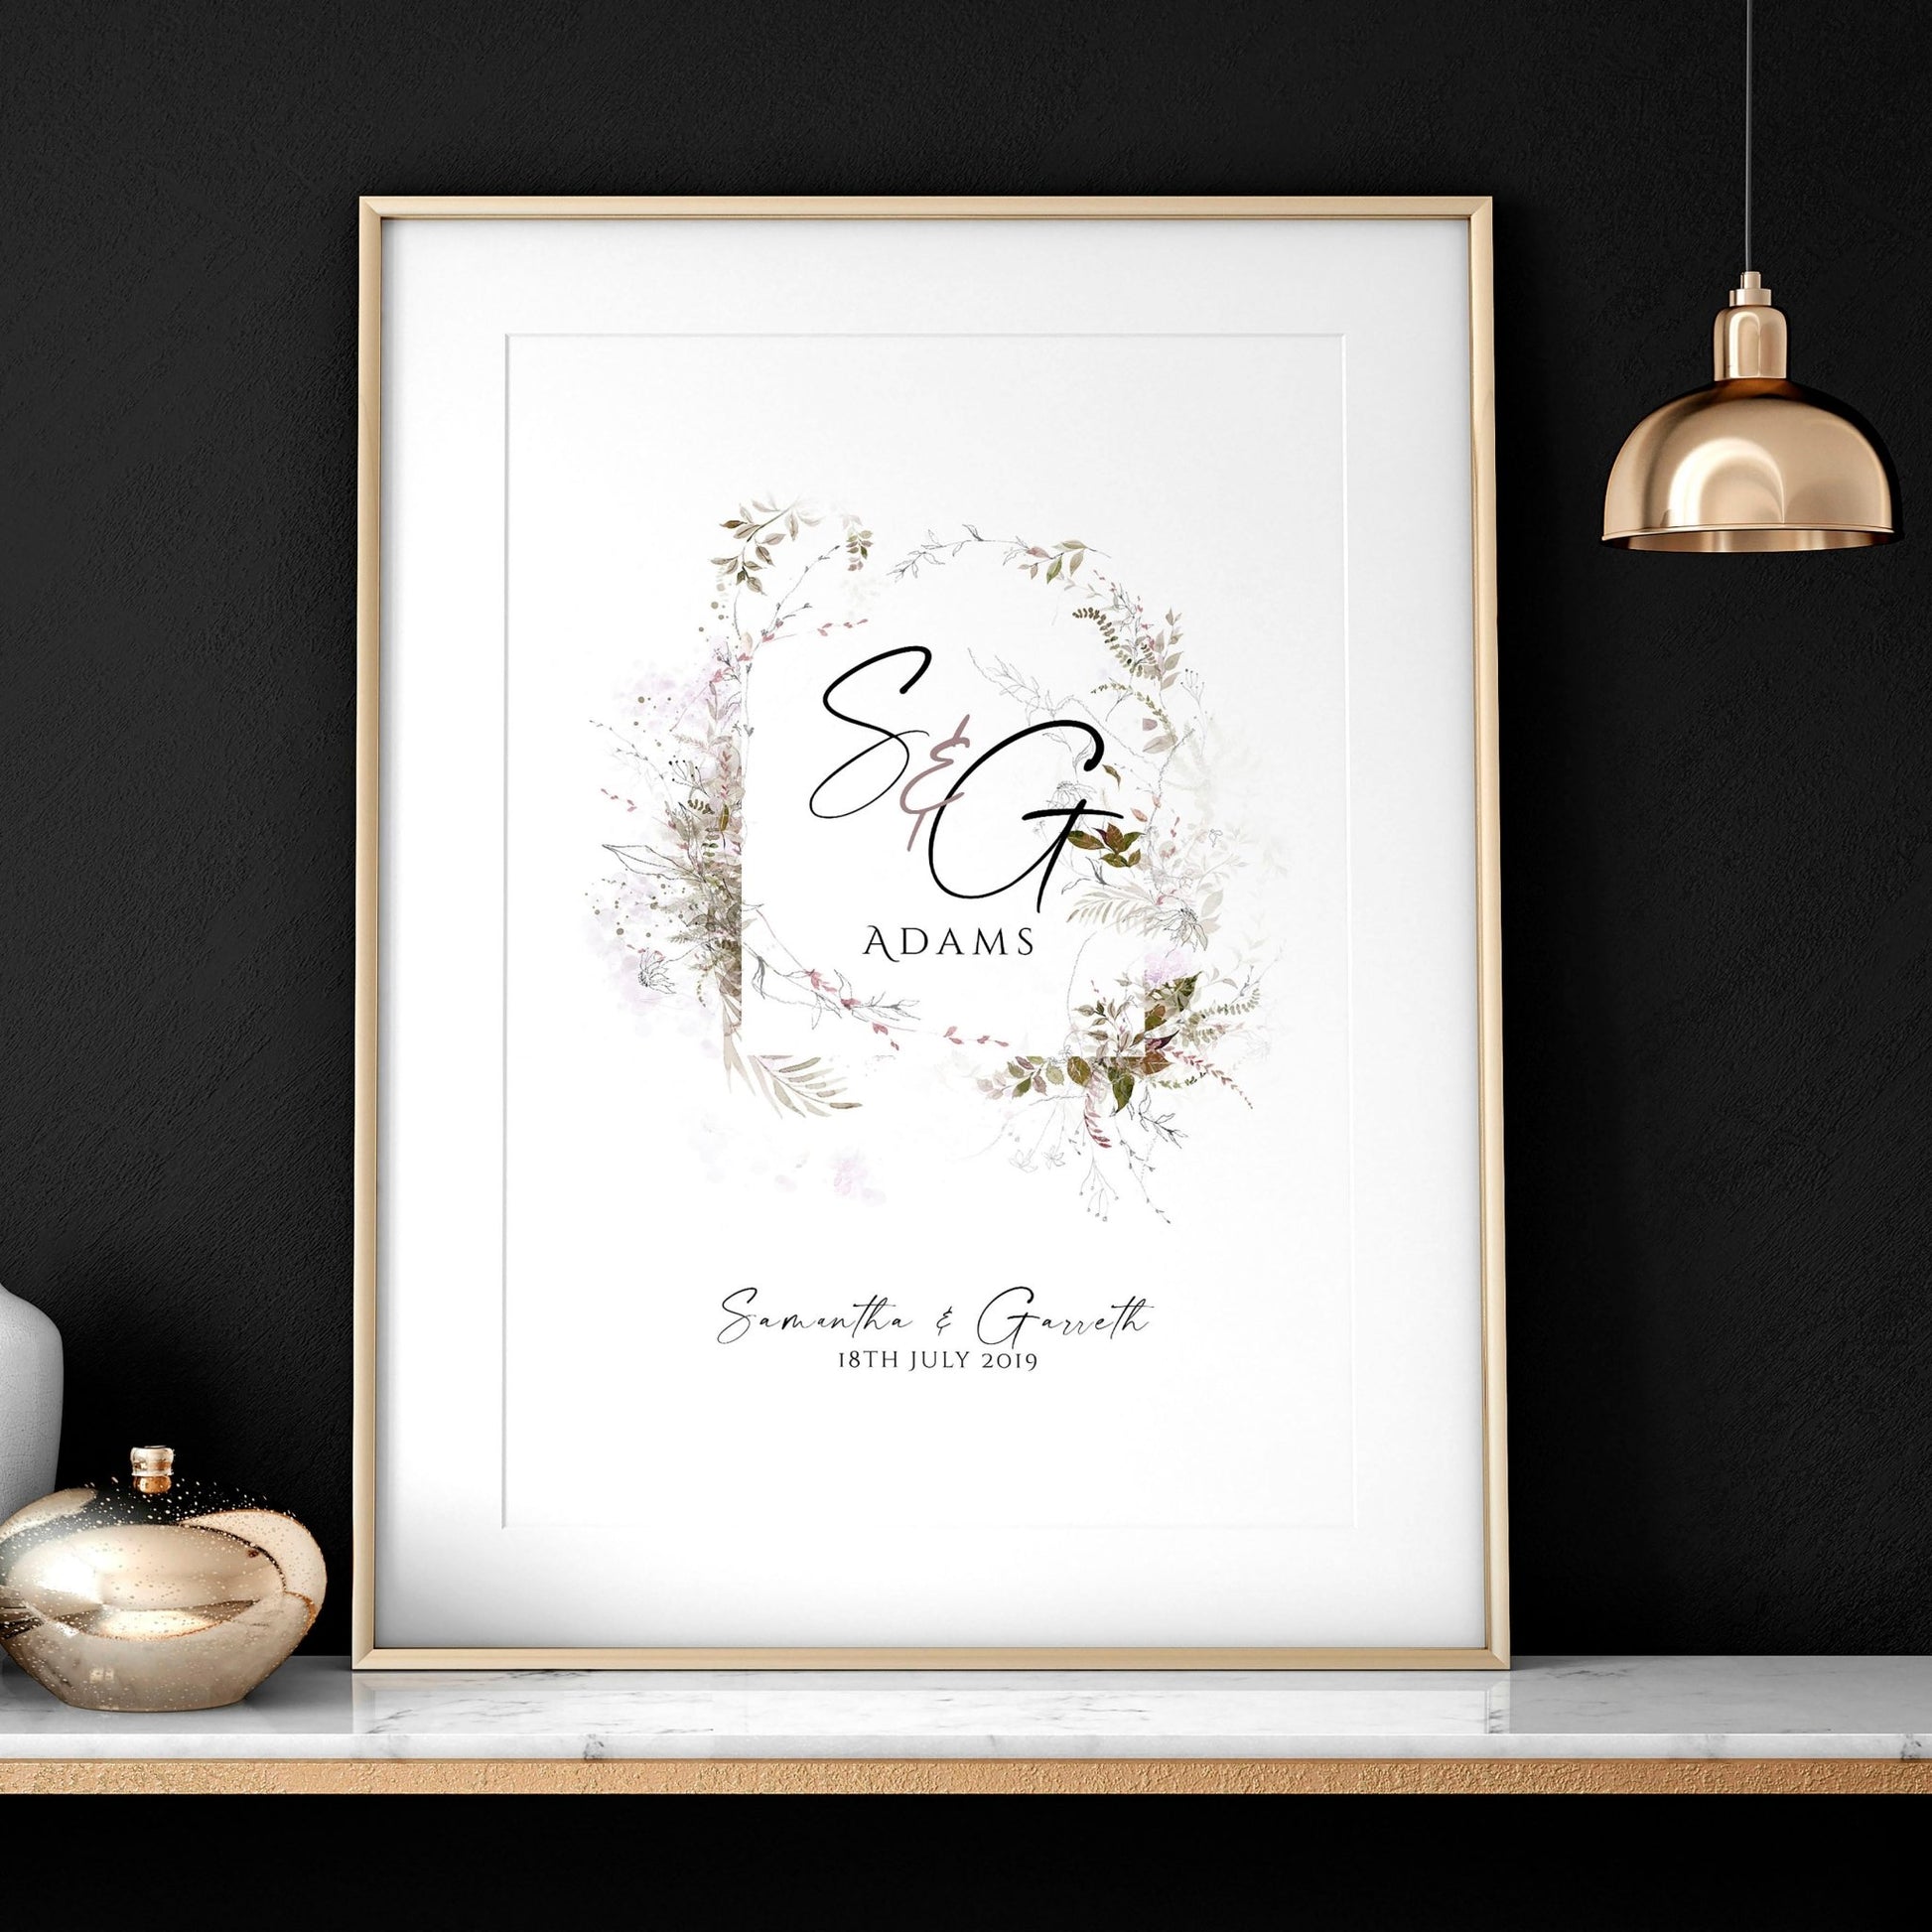 Customized valentines gift | wall art print - About Wall Art